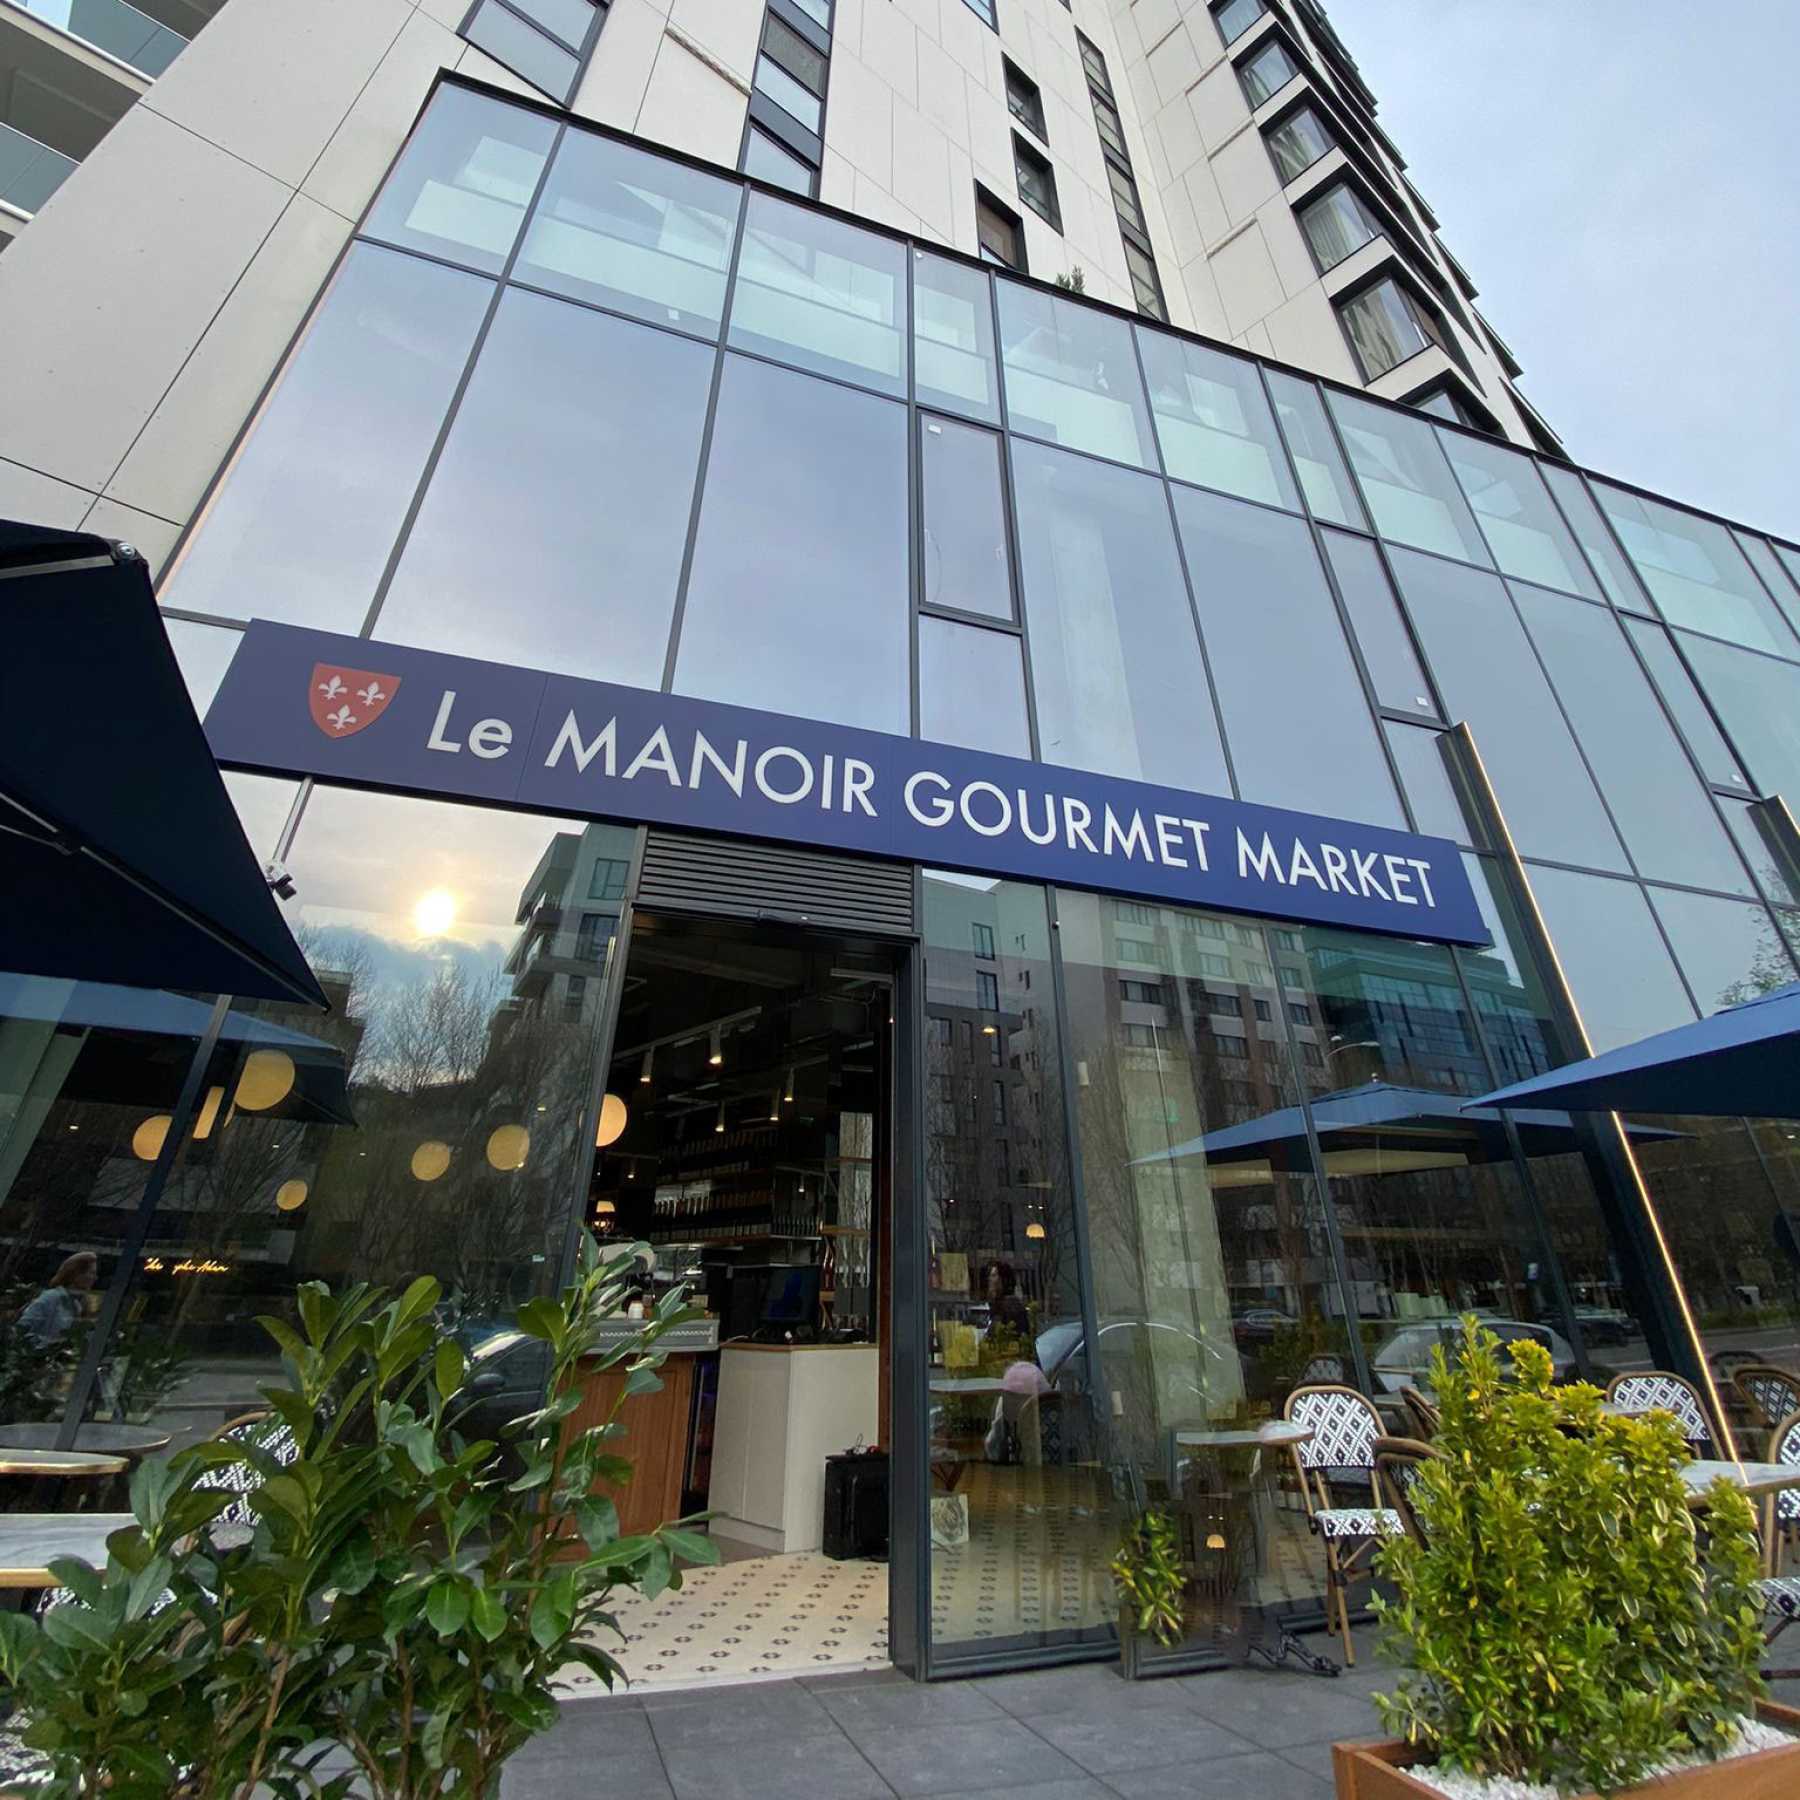 Unique gourmet concept opened within One Herăstrău Towers, with an investment of 1 million euros: Le Manoir Gourmet Market